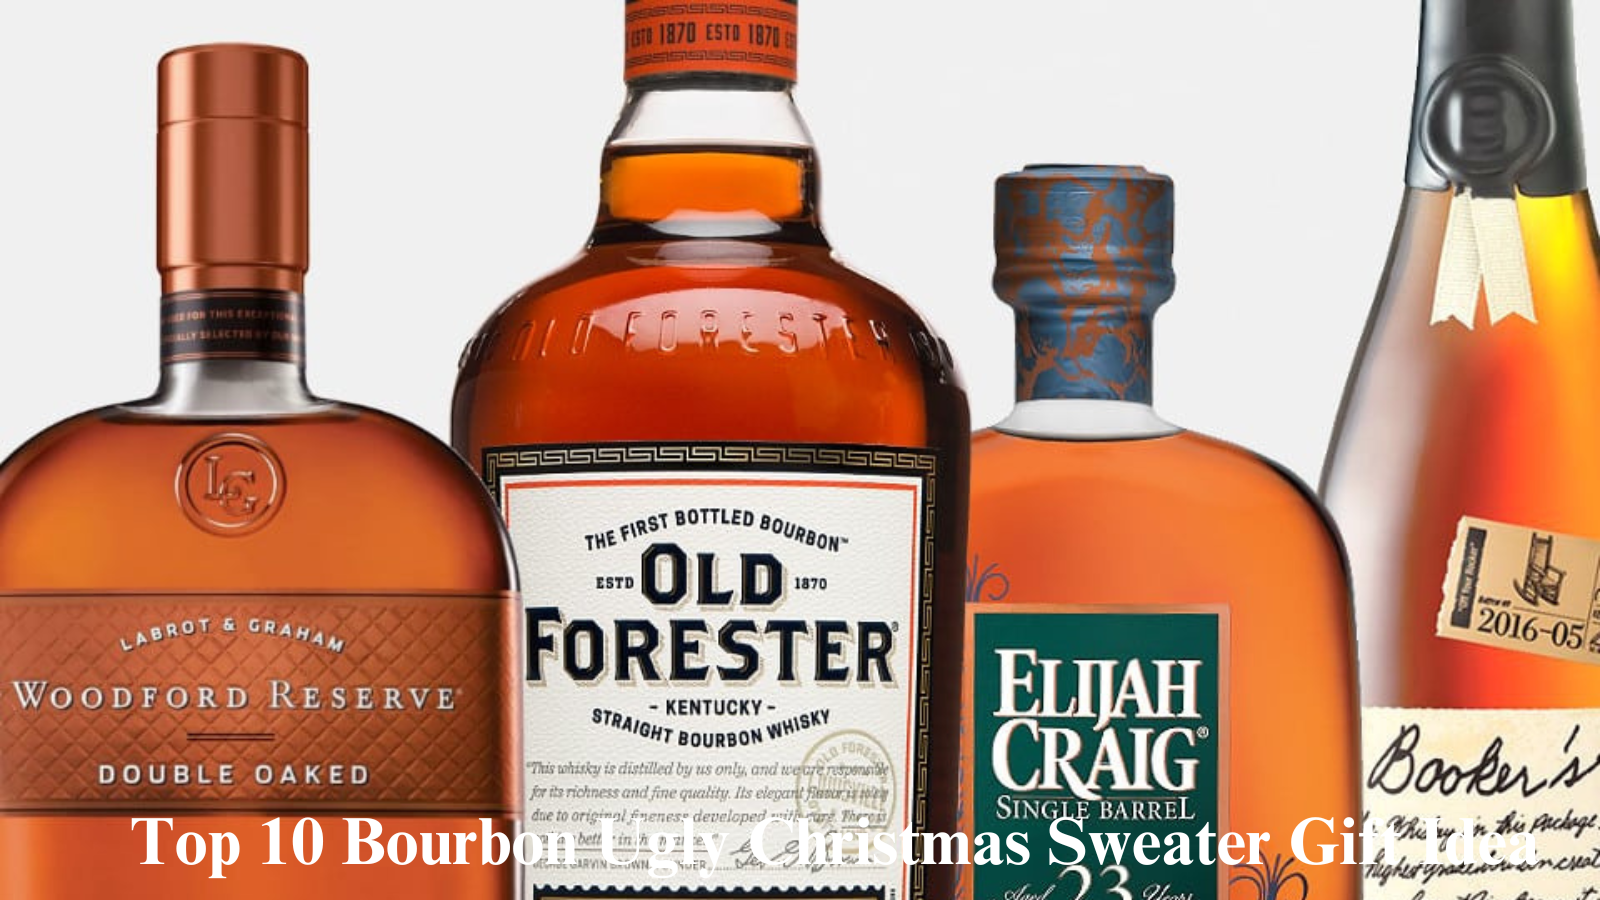 Top 10 Bourbon Ugly Christmas Sweater Gift Idea